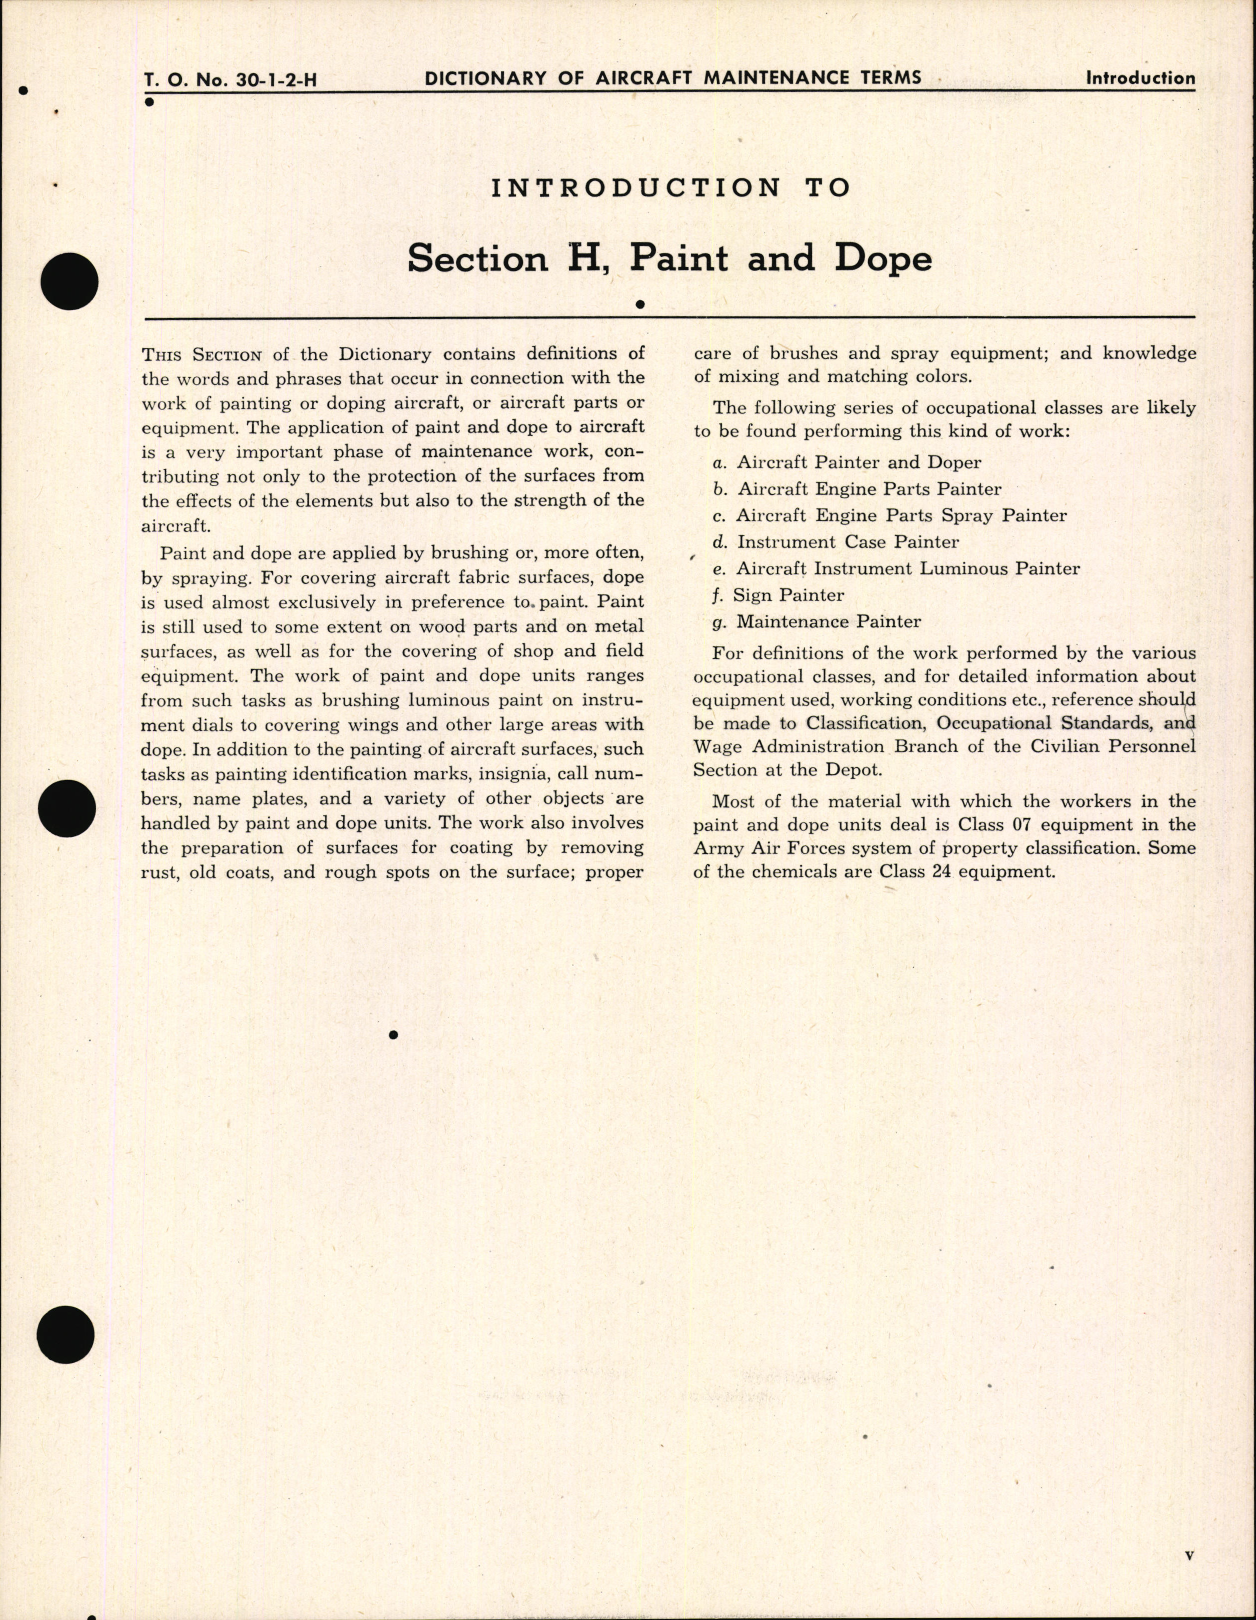 Sample page 7 from AirCorps Library document: Dictionary of Aircraft Maintenance Terms; Section H Paint and Dope